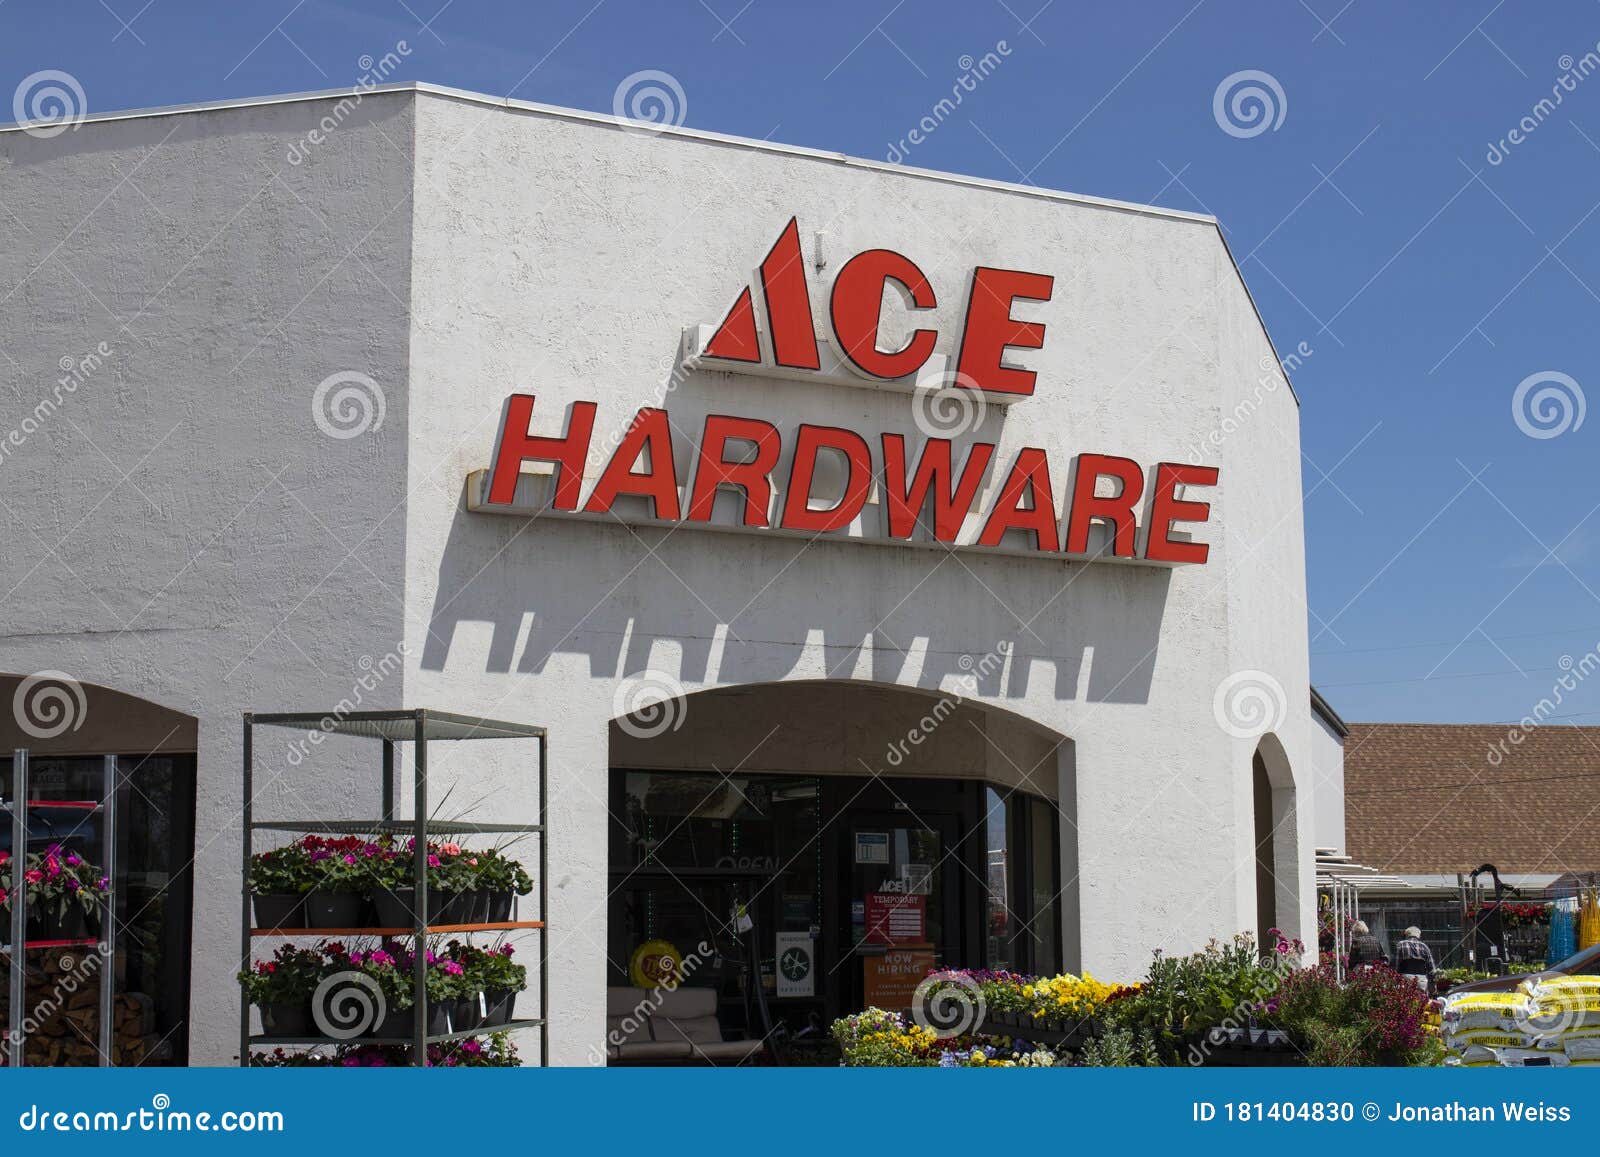 Ace Hardware Retail Cooperative. The Majority Of Ace